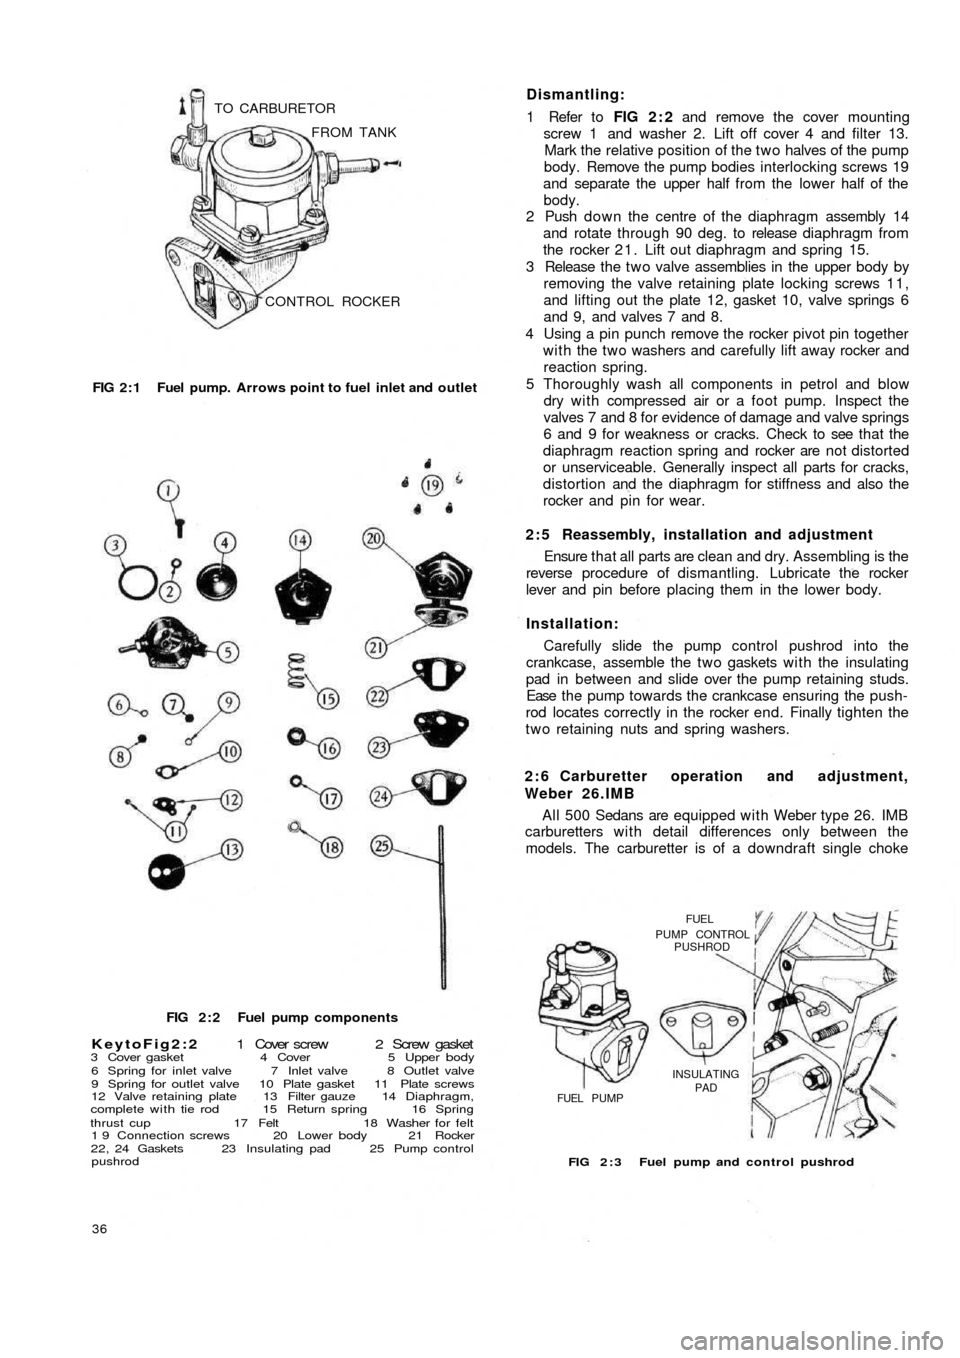 FIAT 500 1958 1.G Workshop Manual CONTROL ROCKER FROM TANK TO CARBURETOR
FIG 2 : 1  Fuel pump. Arrows point to fuel  inlet and outlet
FIG 2 : 2  Fuel pump components
KeytoFig2:2 1  Cover  screw  2  Screw  gasket3 Cover gasket 4 Cover 